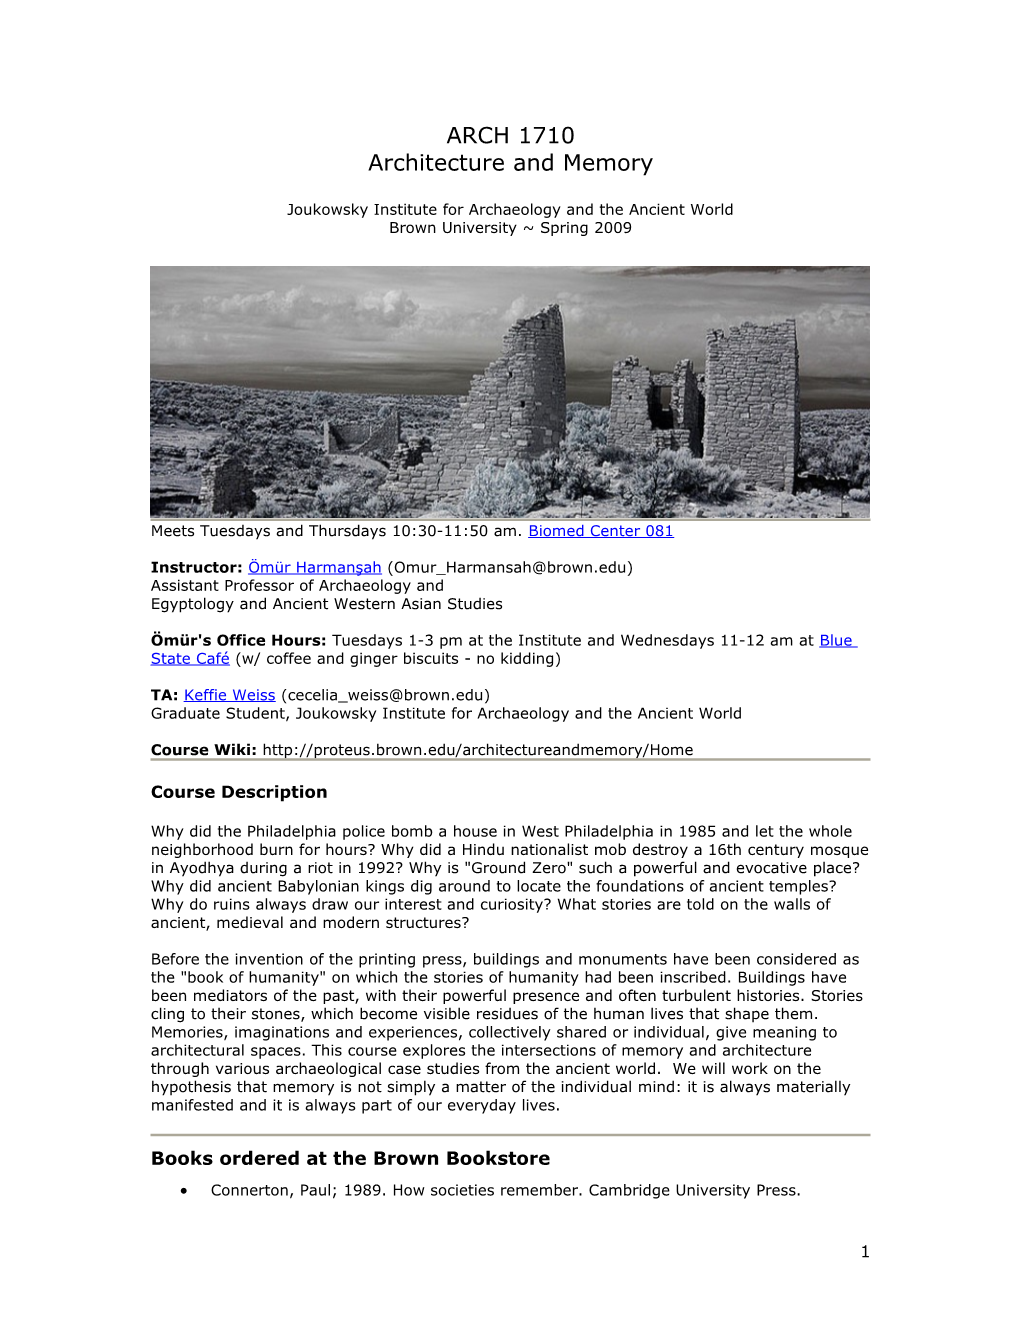 Architecture and Memory Joukowsky Institute for Archaeology and the Ancient World